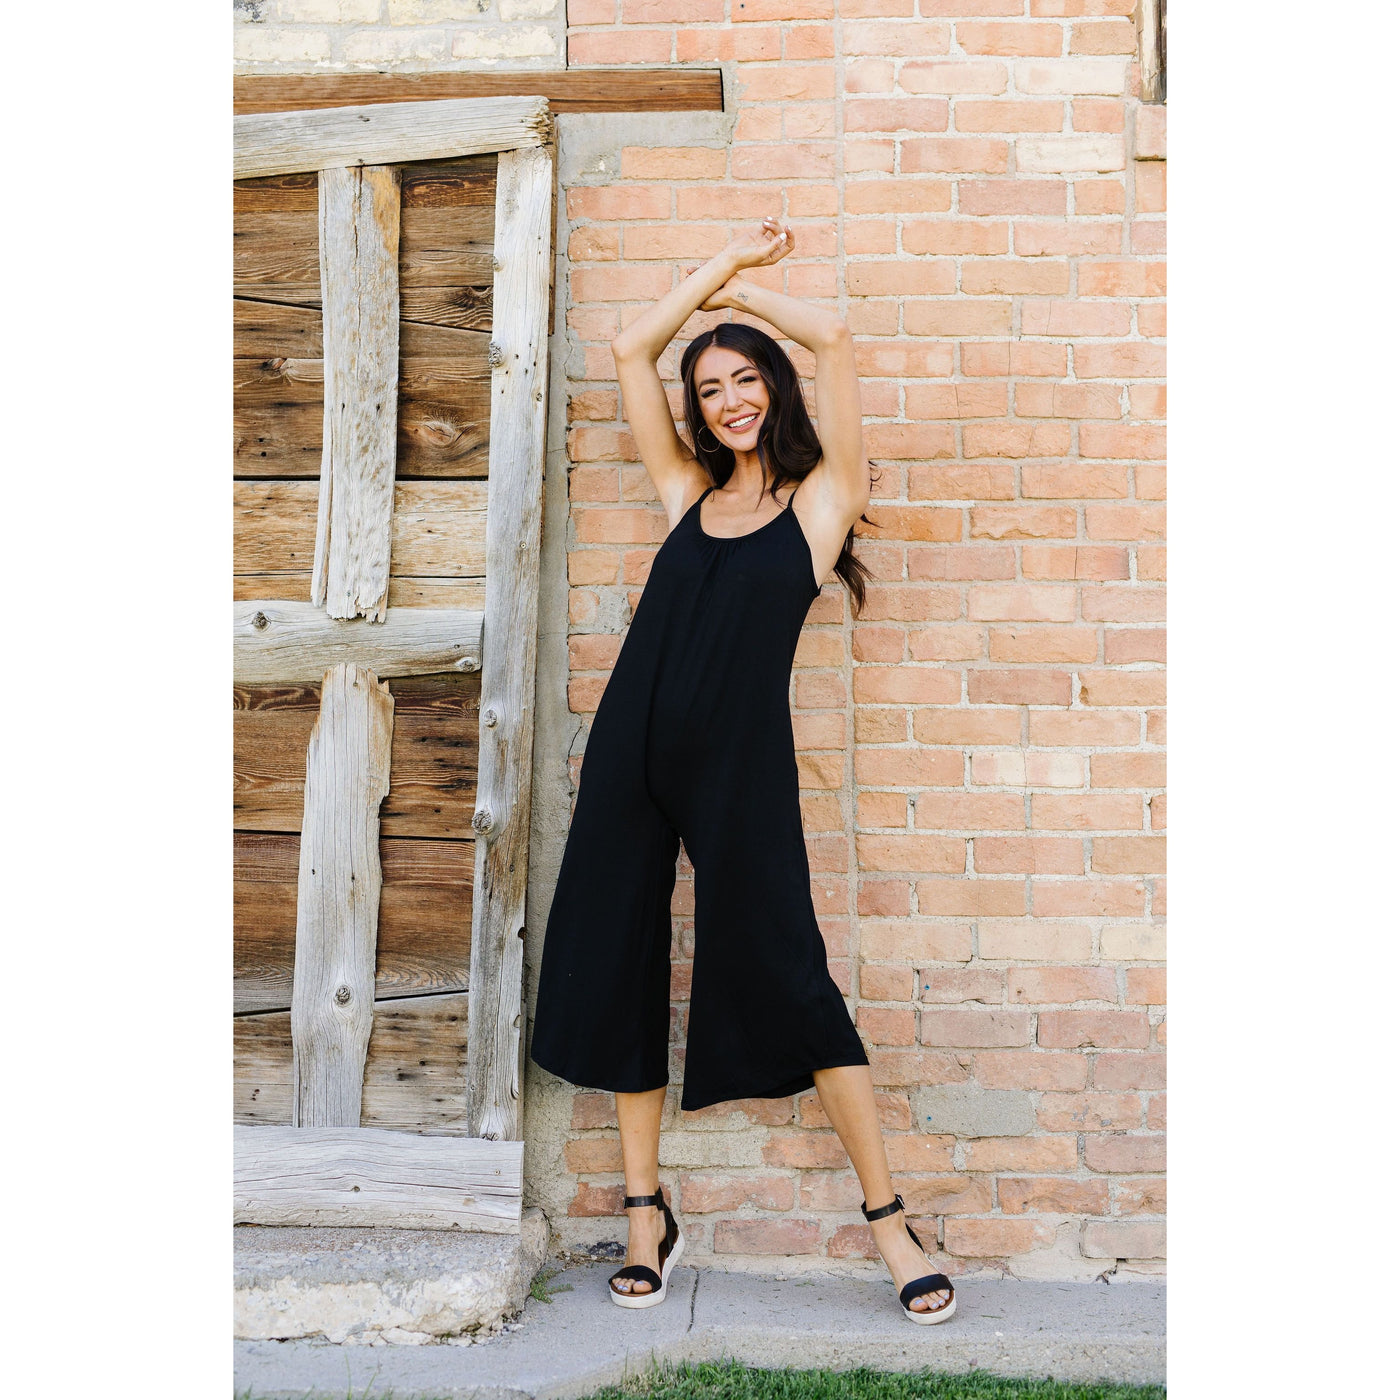 Good Better Best Cropped Tank Jumpsuit-W Dress-Graceful & Chic Boutique, Family Clothing Store in Waxahachie, Texas